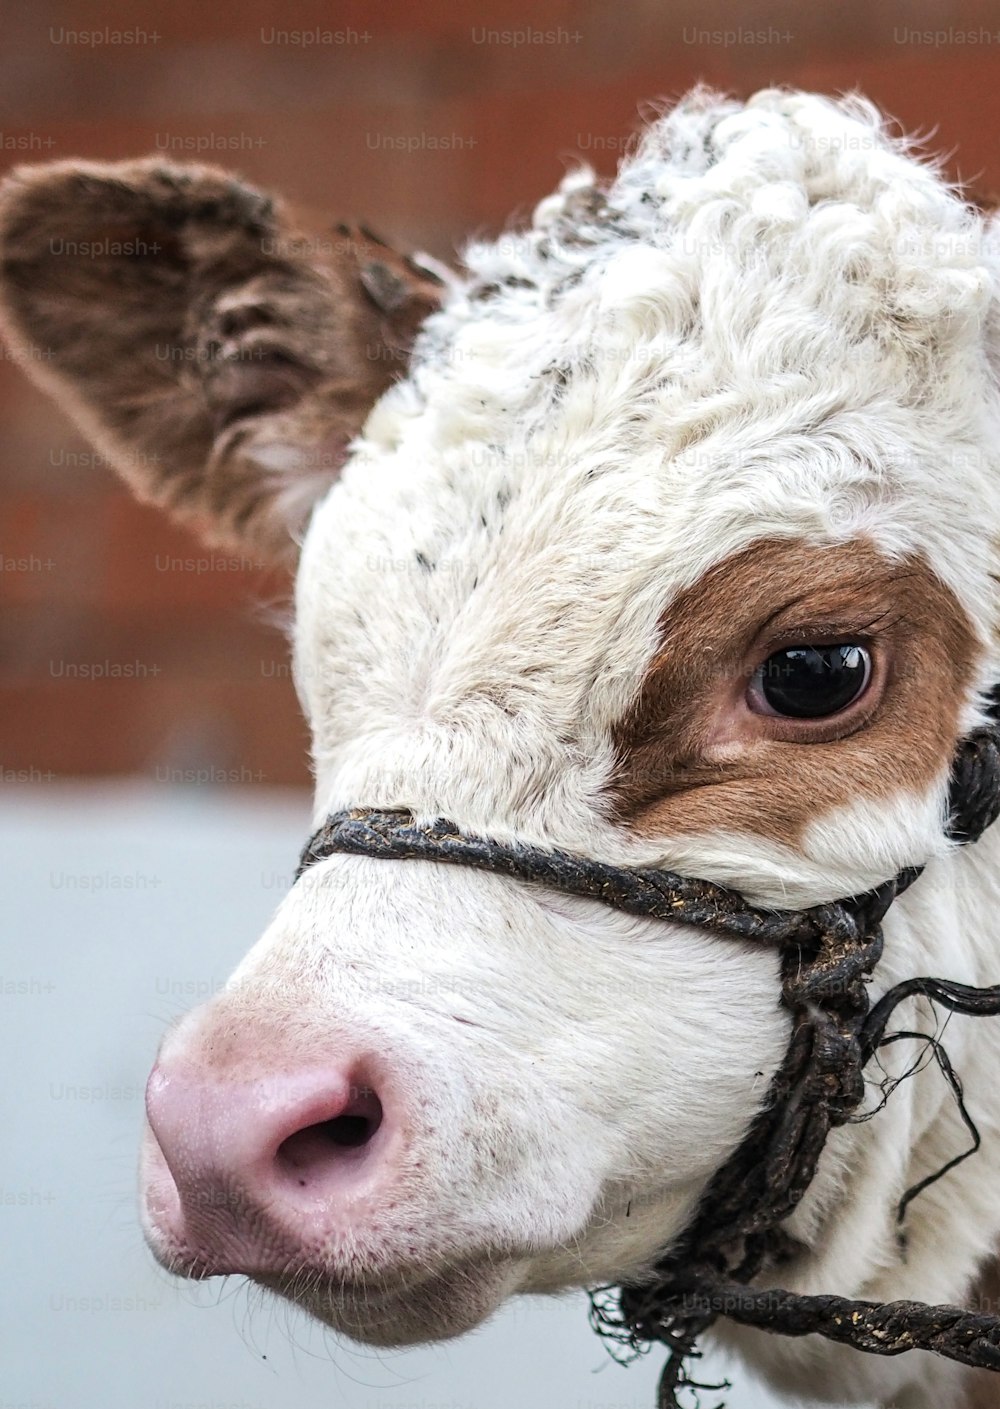 a close up of a cow wearing a harness